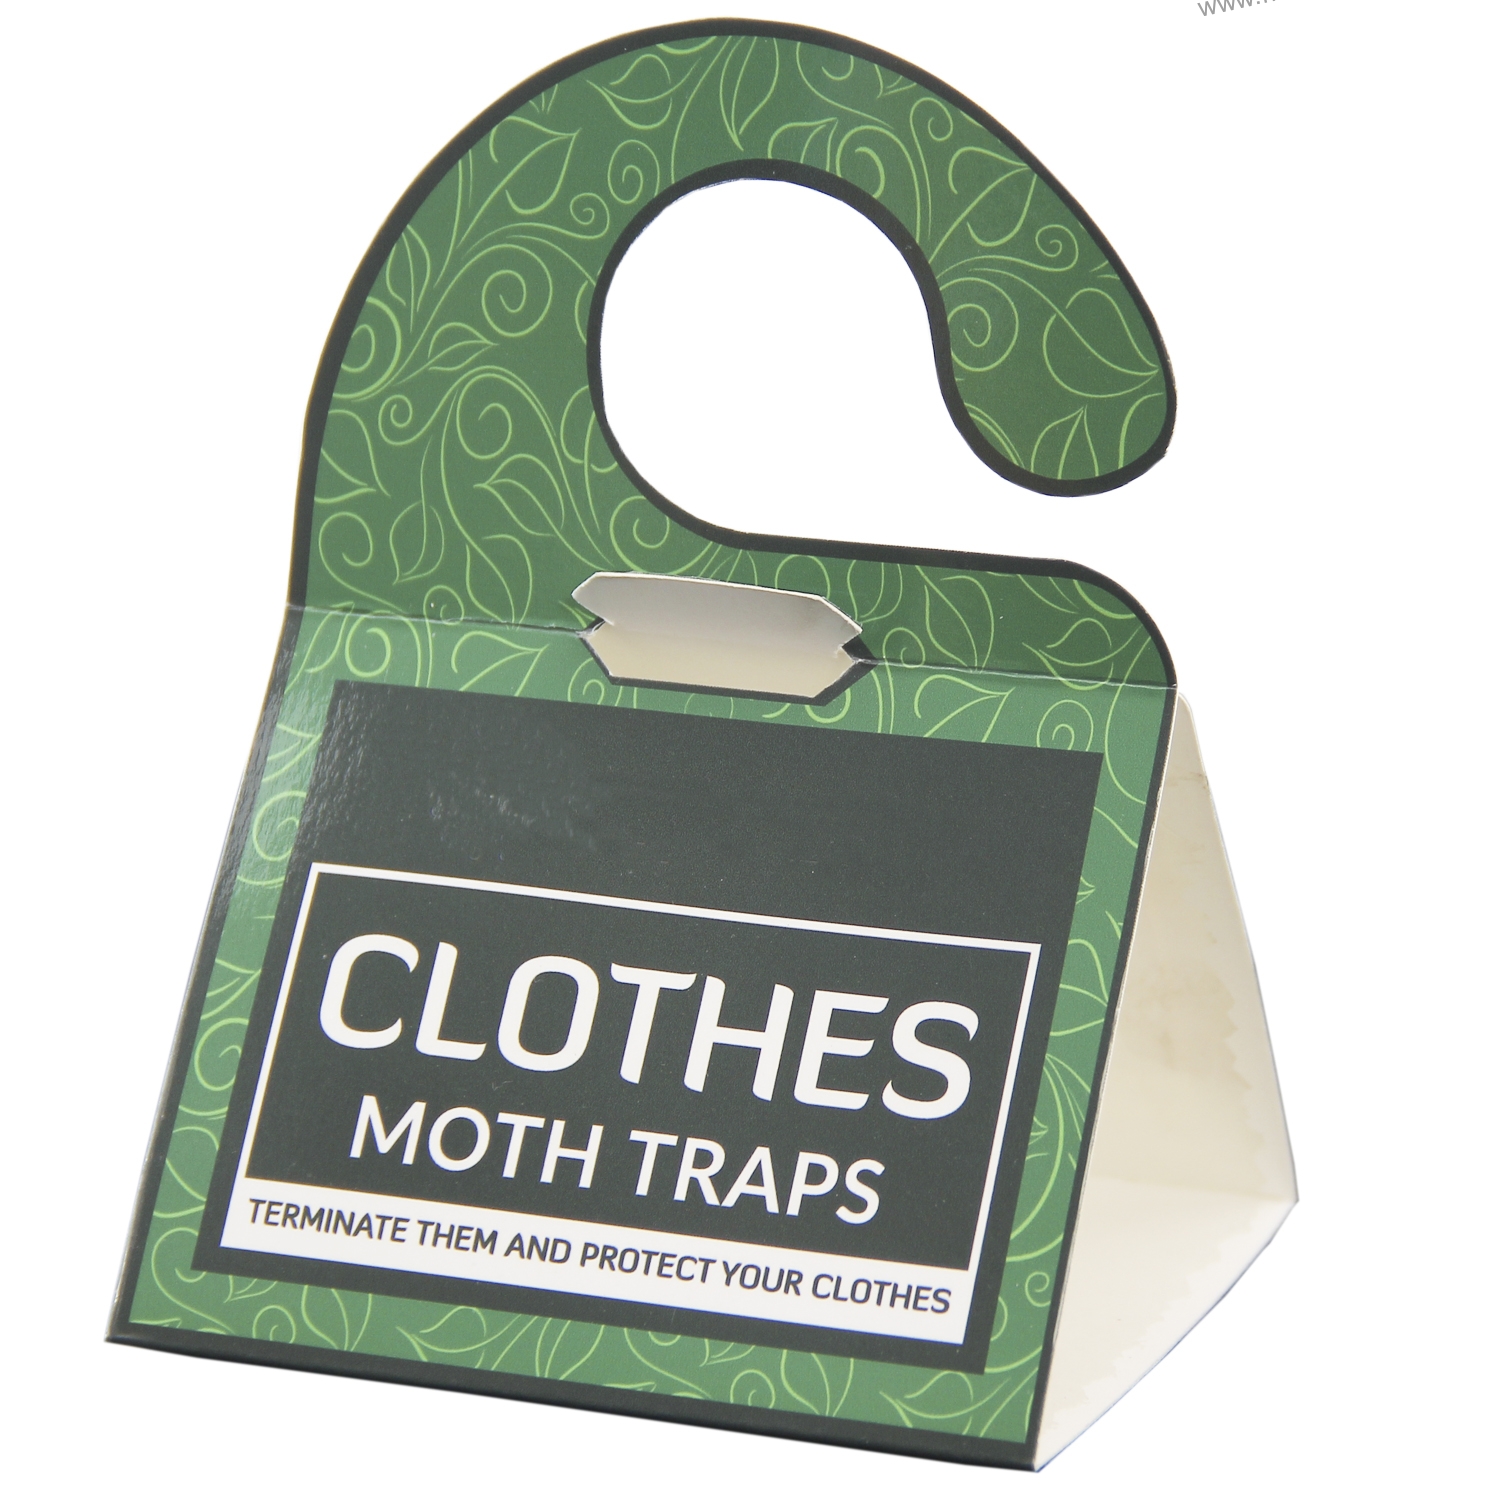 >Amazon Ebay Best Seller Moth Busters  Pantry & Clothes Moth Trap w/Natural Pheromone attractant Non-Toxic Safe NO INSECTICIDES